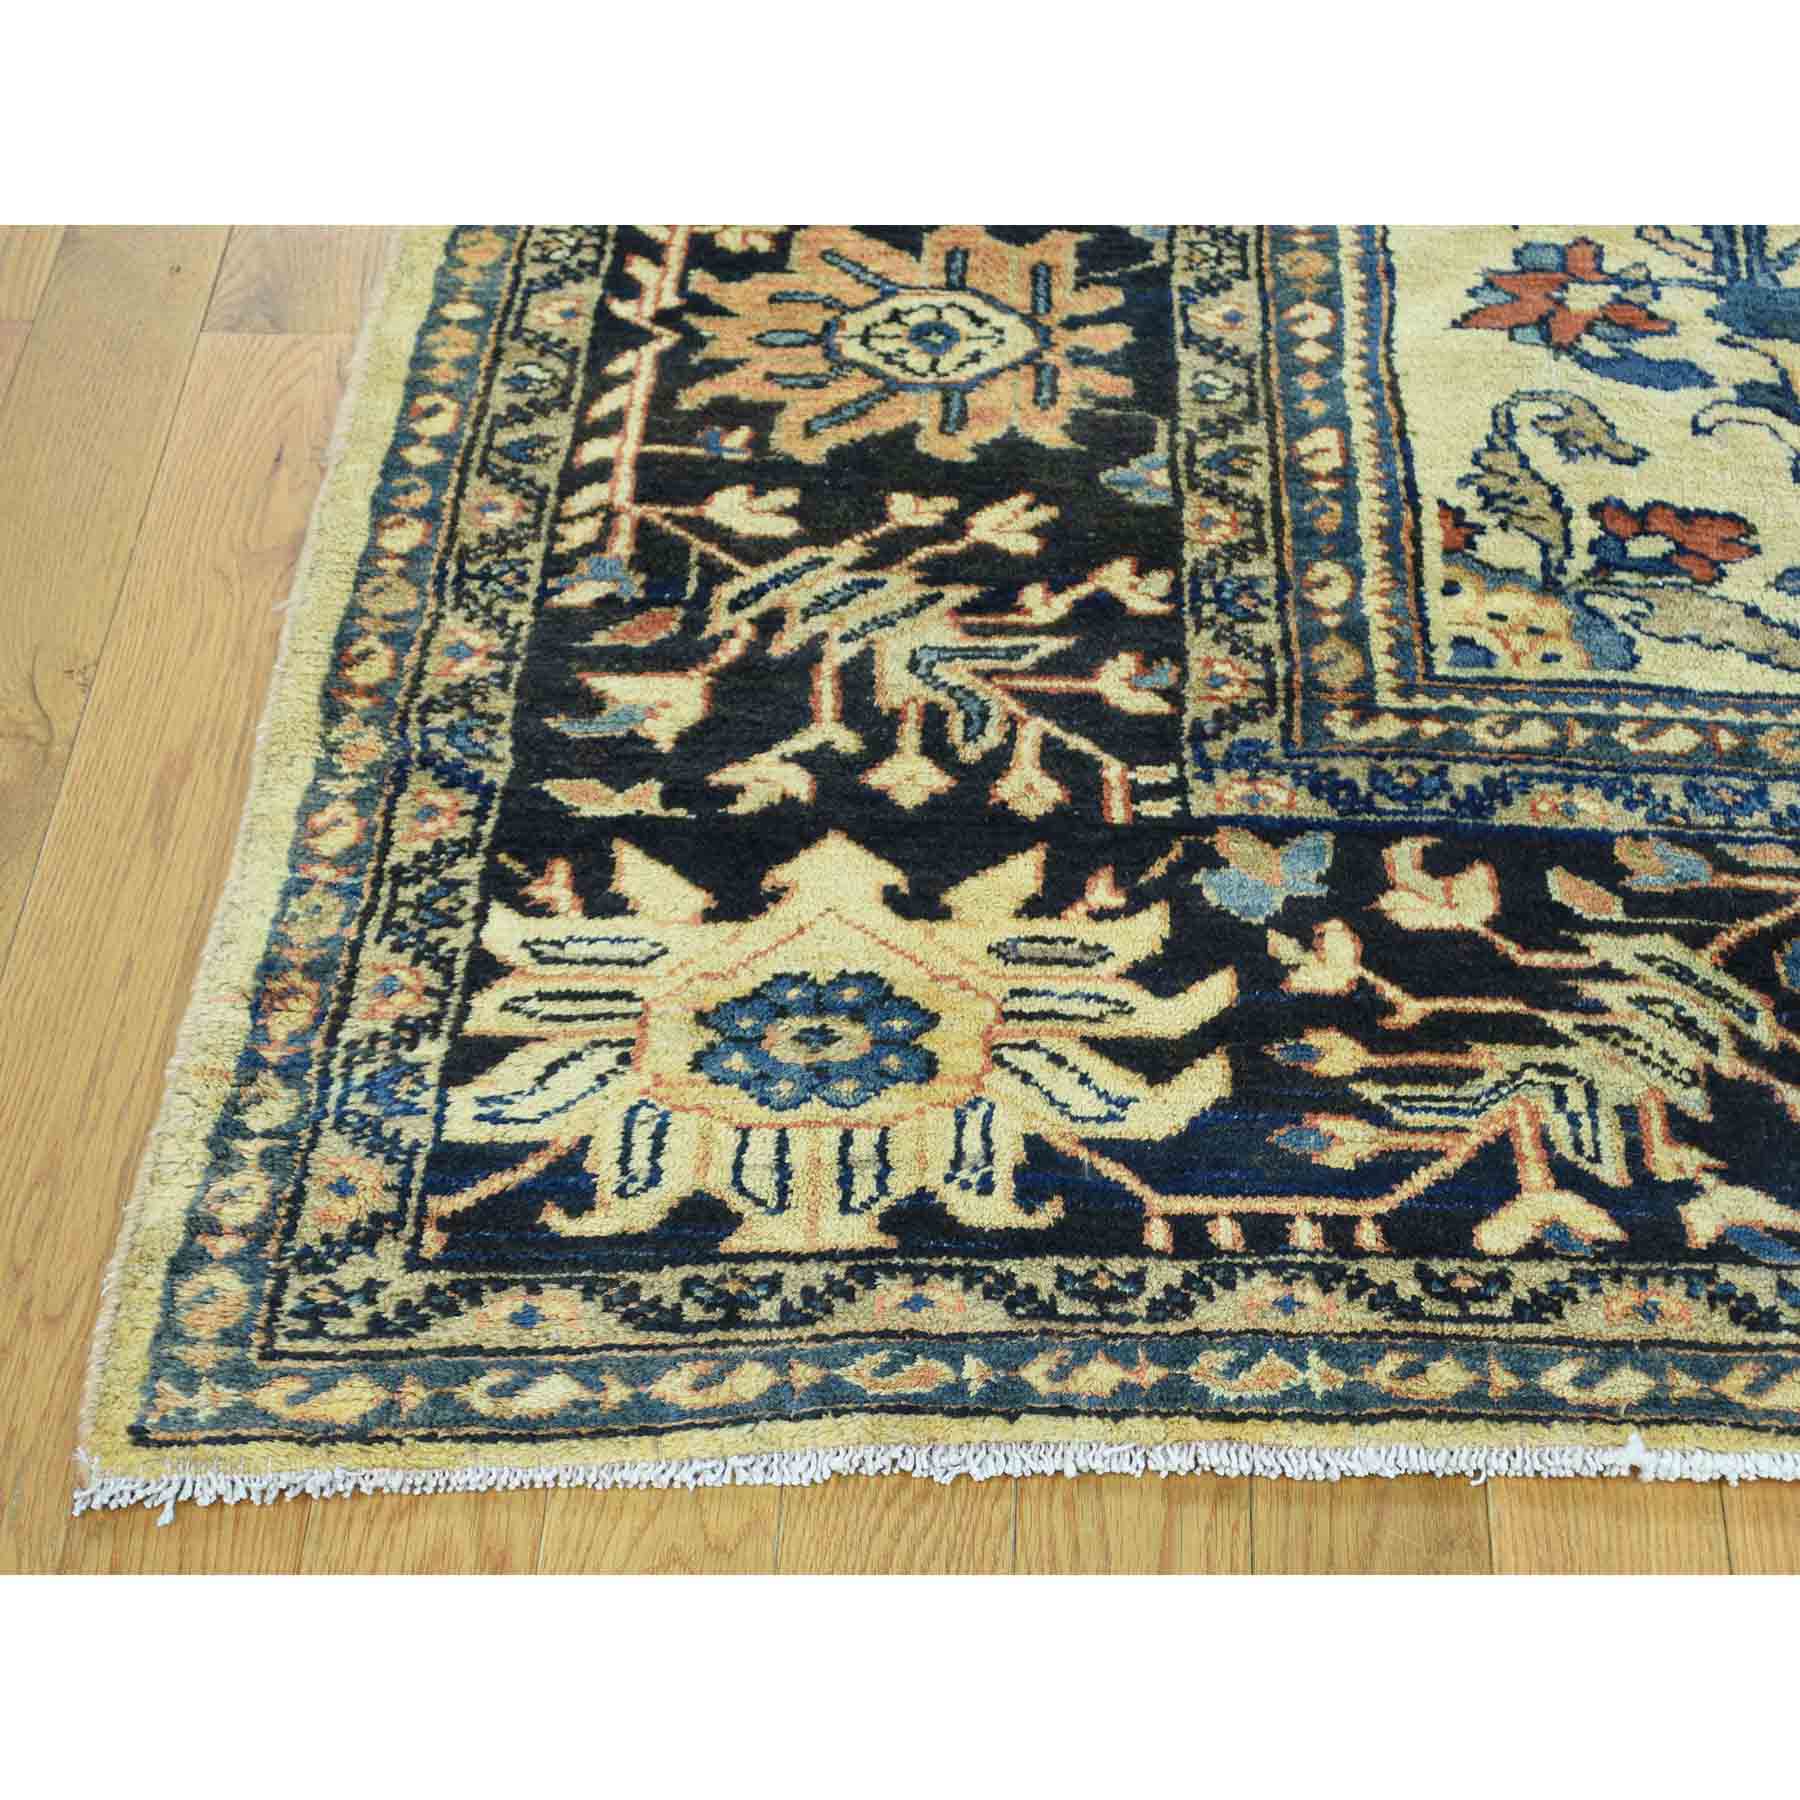 Antique-Hand-Knotted-Rug-172160